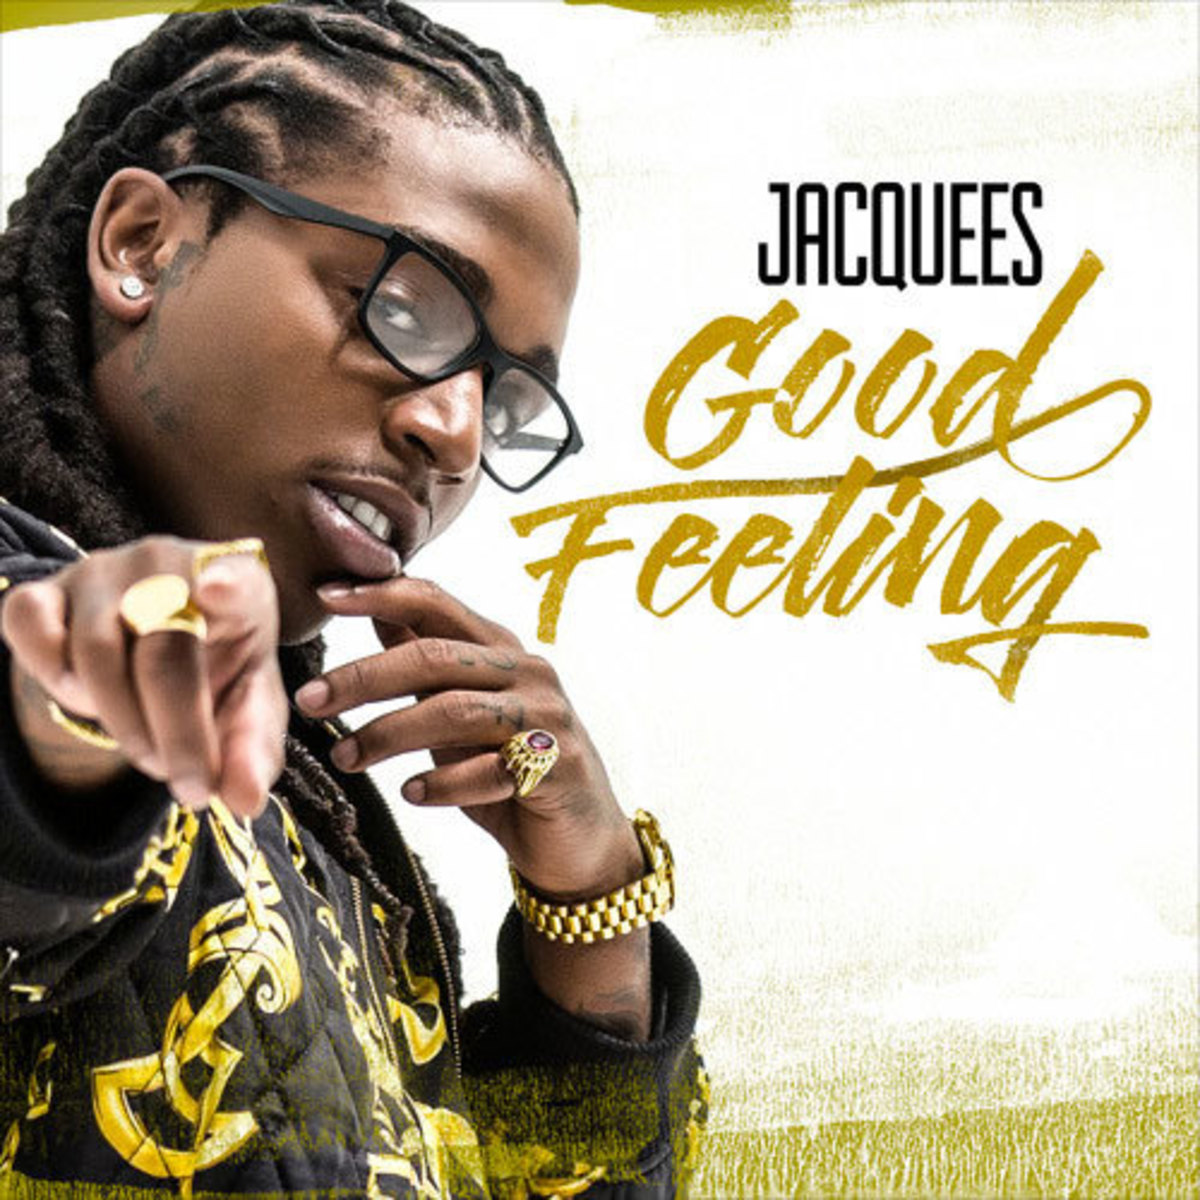 Jacquees Good Feeling DJBooth.